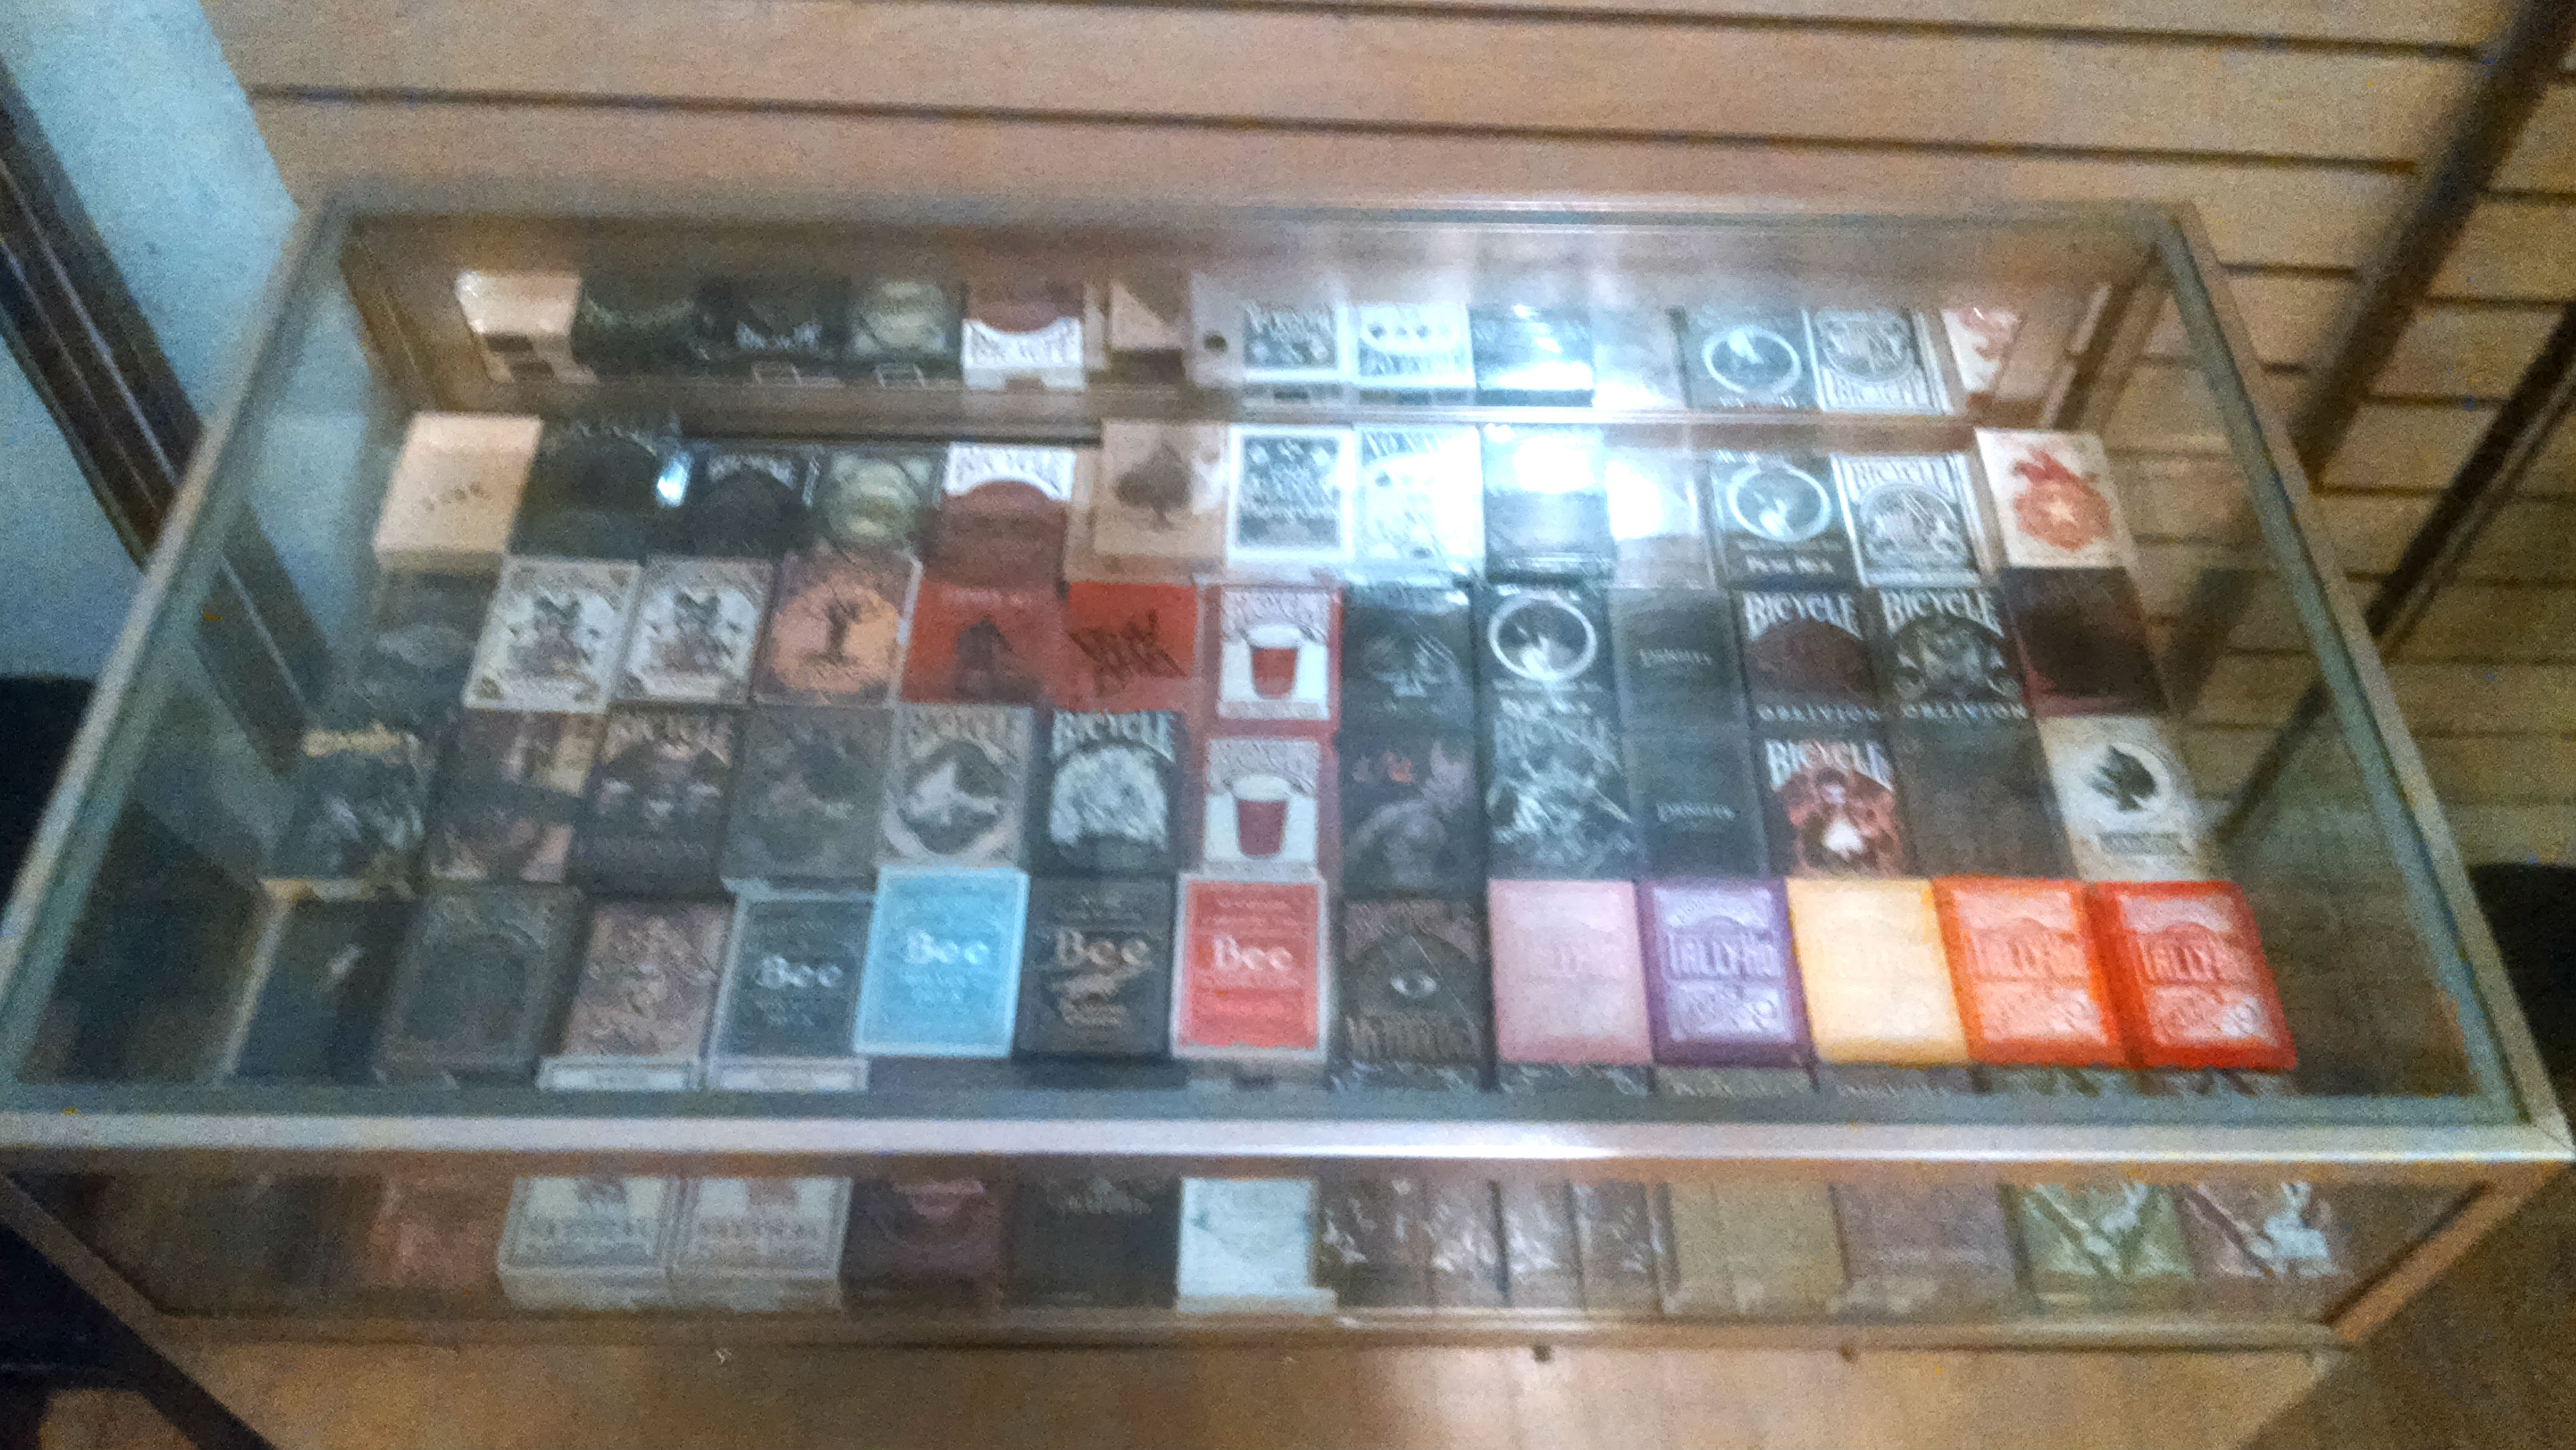 A collection of card decks for sale at South Street Magic. (Credit: Tom Rickert)